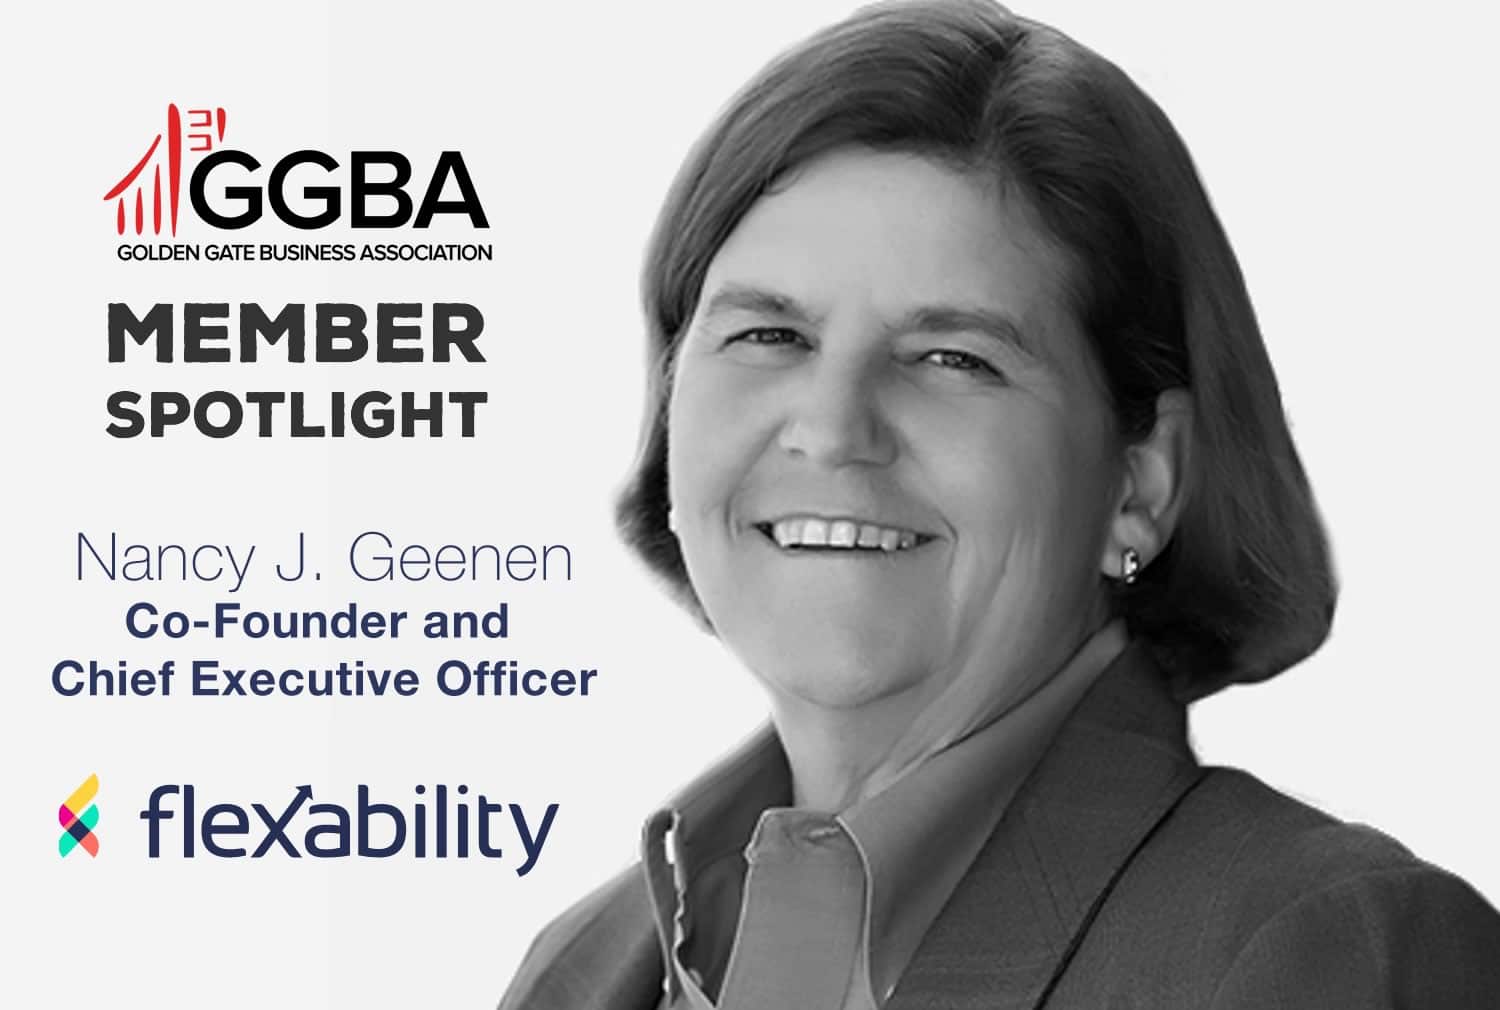 You are currently viewing Member Spotlight: Nancy Geenen, CEO of Flexability